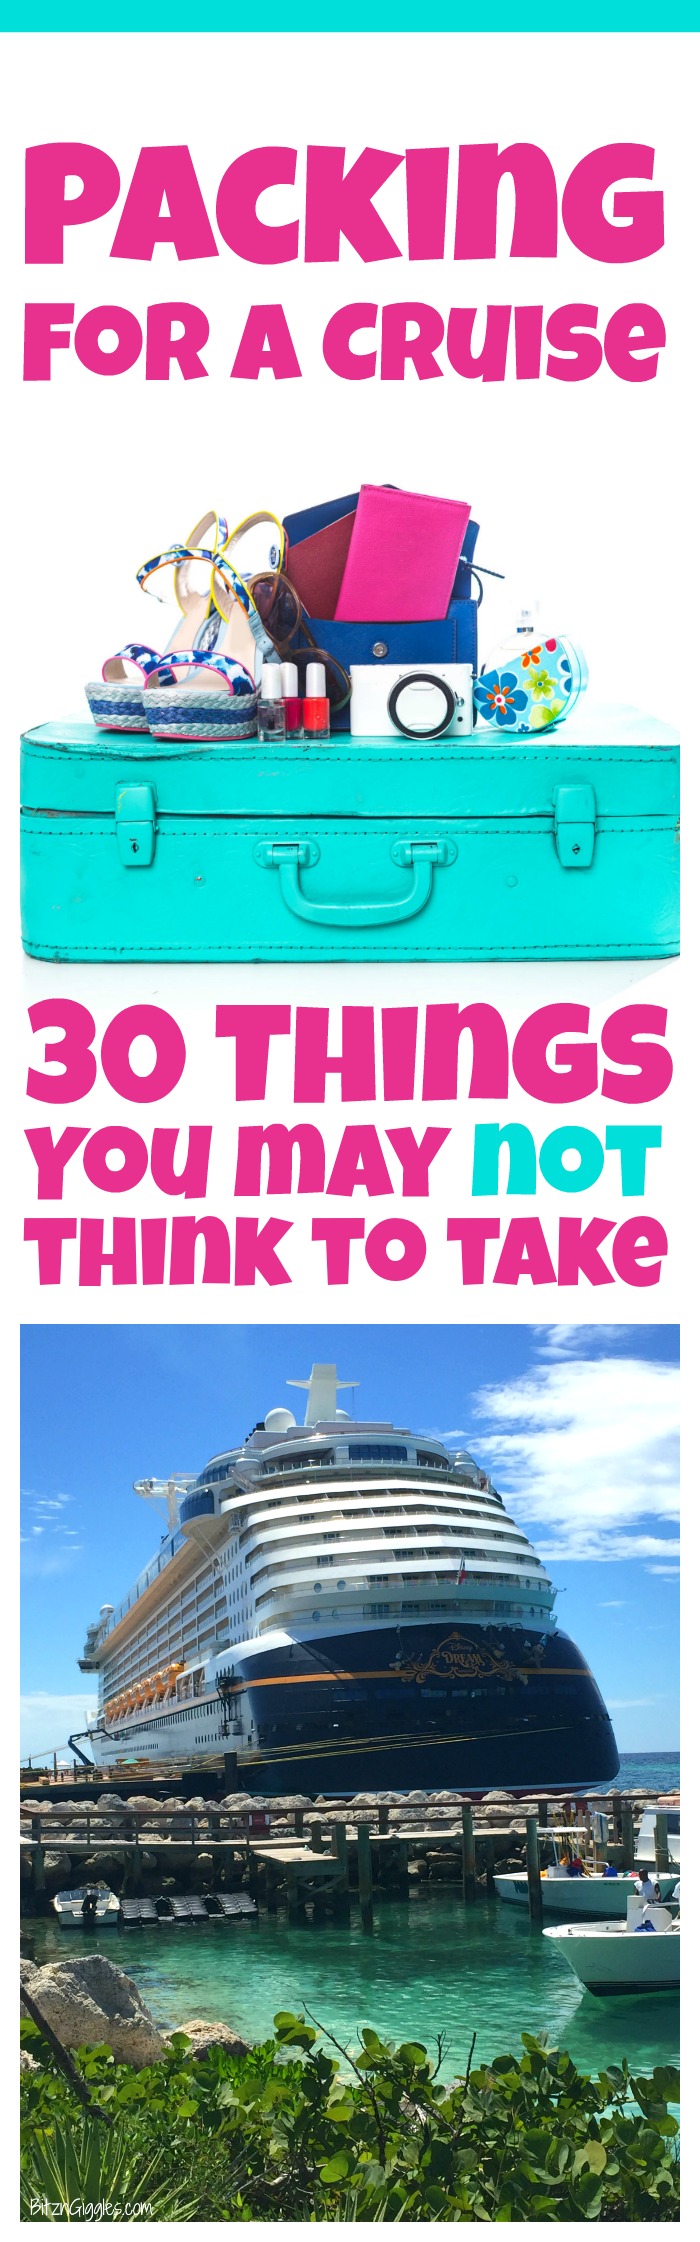 Packing for a Cruise: 30 Things You May Not Think to Take - Whether you're a first time or seasoned cruiser, you need to read this list before taking your next cruise vacation! #cruise #Disneycruise #Royalcaribbean #cruisetips #travel #traveltips #bitzngiggles